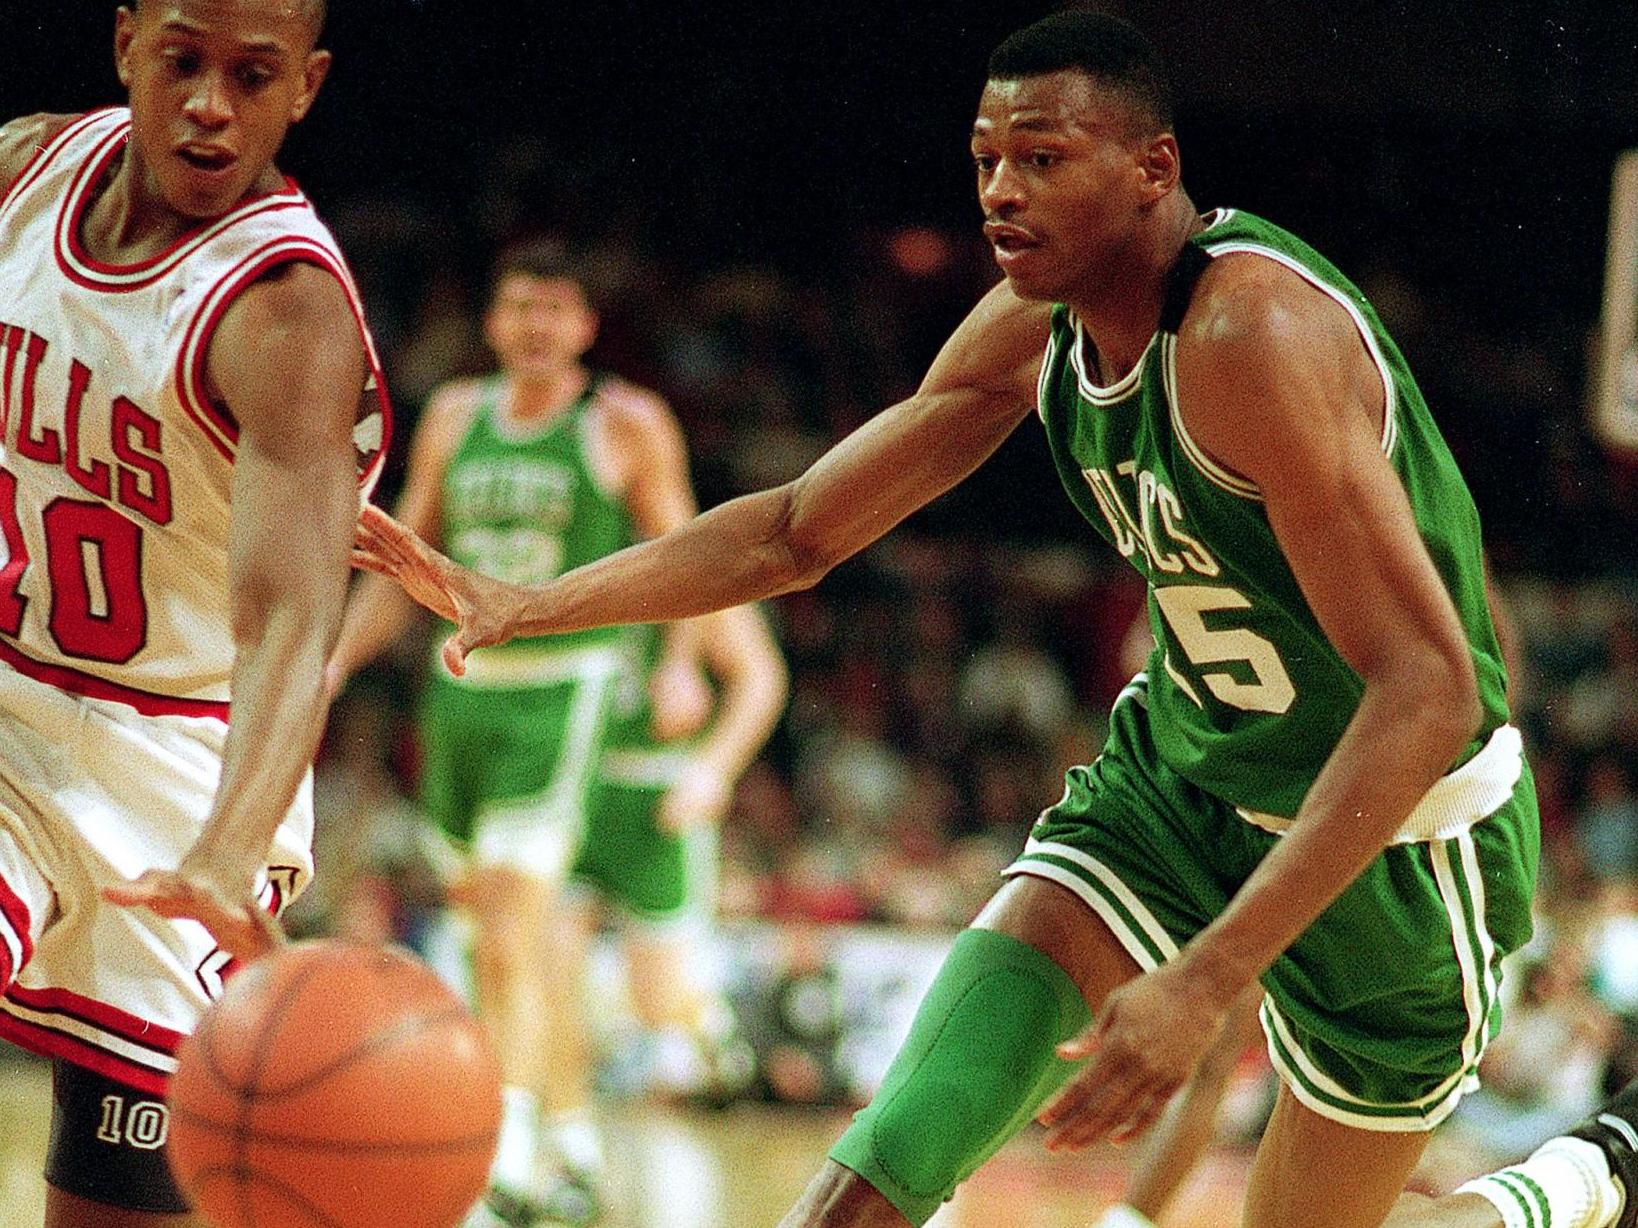 Reggie Lewis, a 27-year-old Boston Celtics star, collapsed at a practice before a playoff game in 1993 and later died